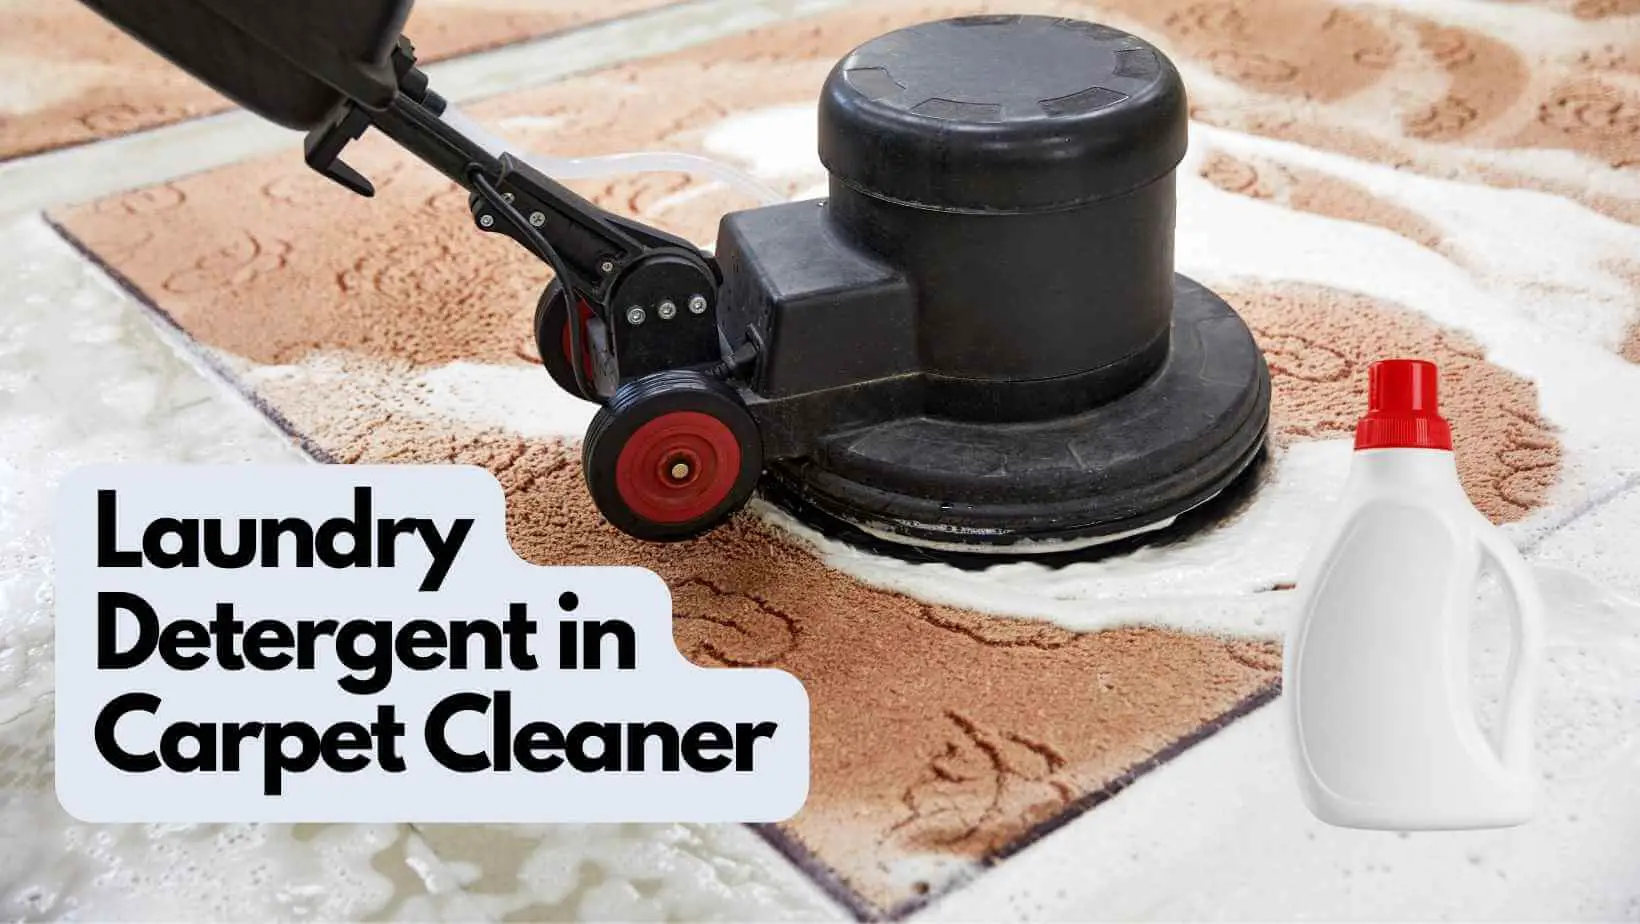 Laundry Detergent in Carpet Cleaner